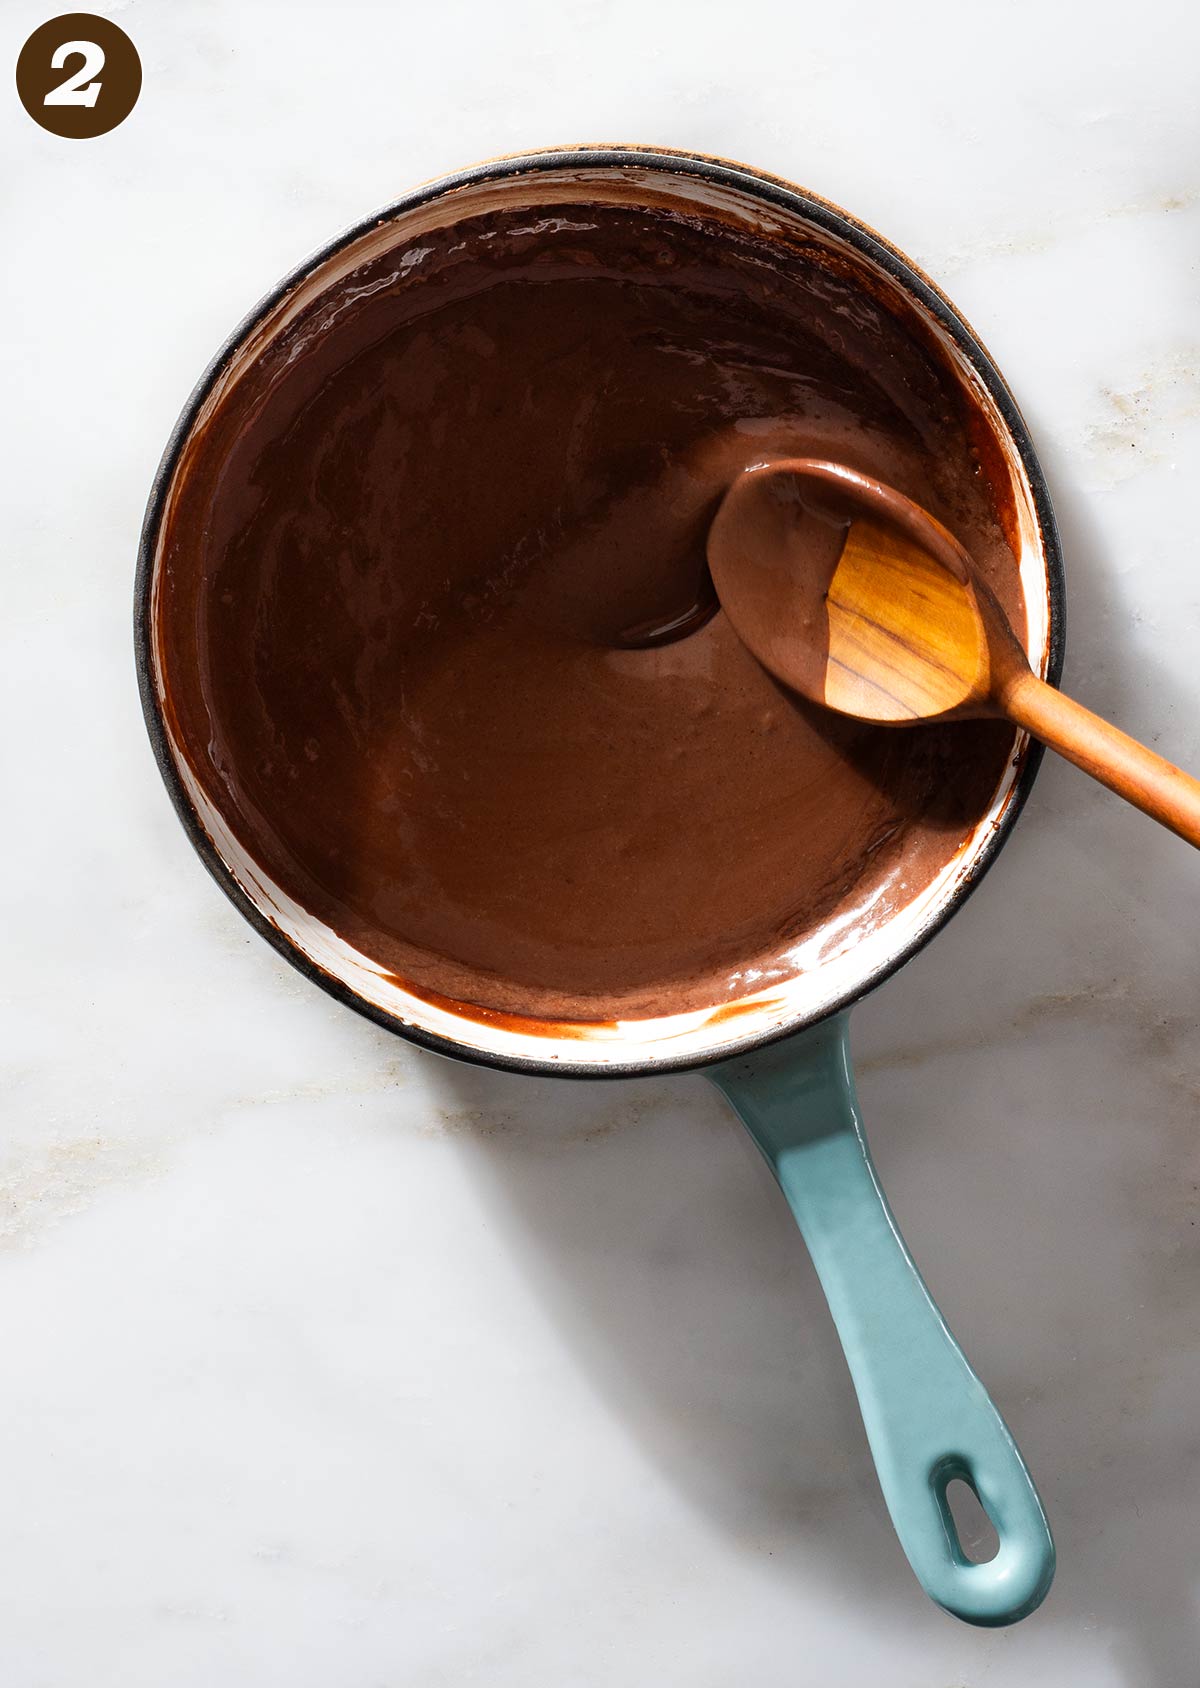 Chocolate mix being stirred in a saucepan.